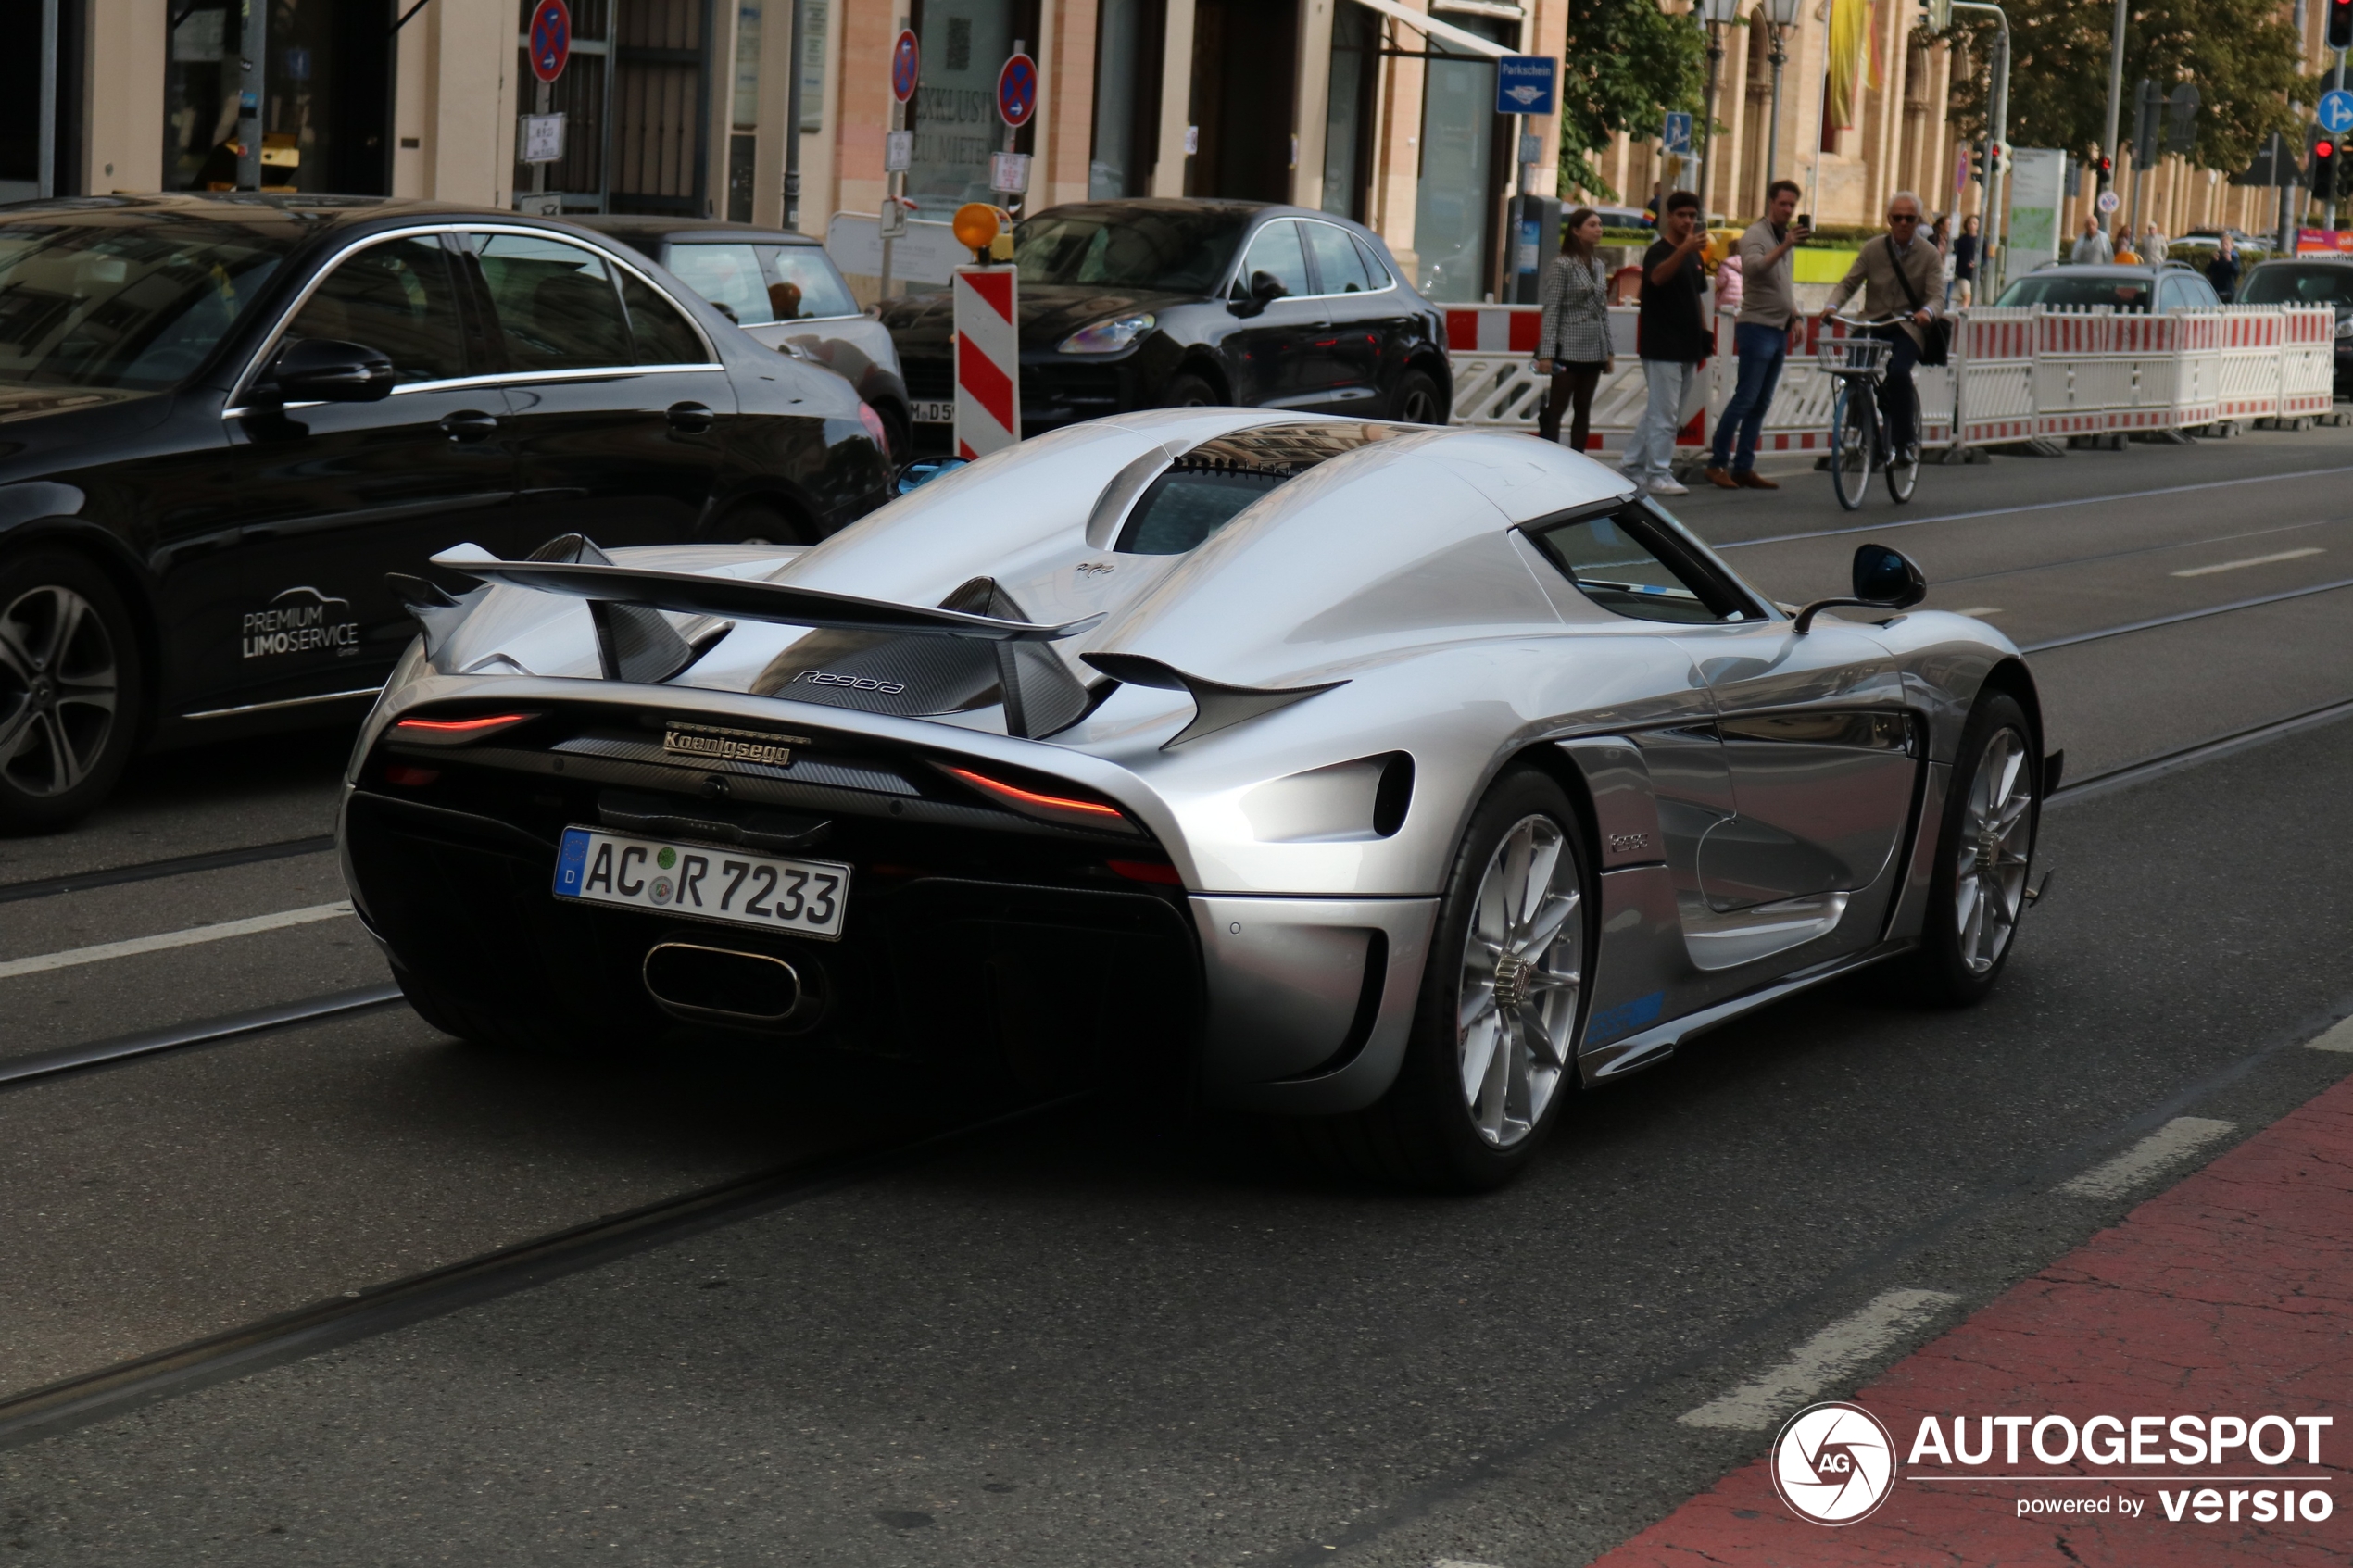 Finally, this Regera has surfaced in Munich.